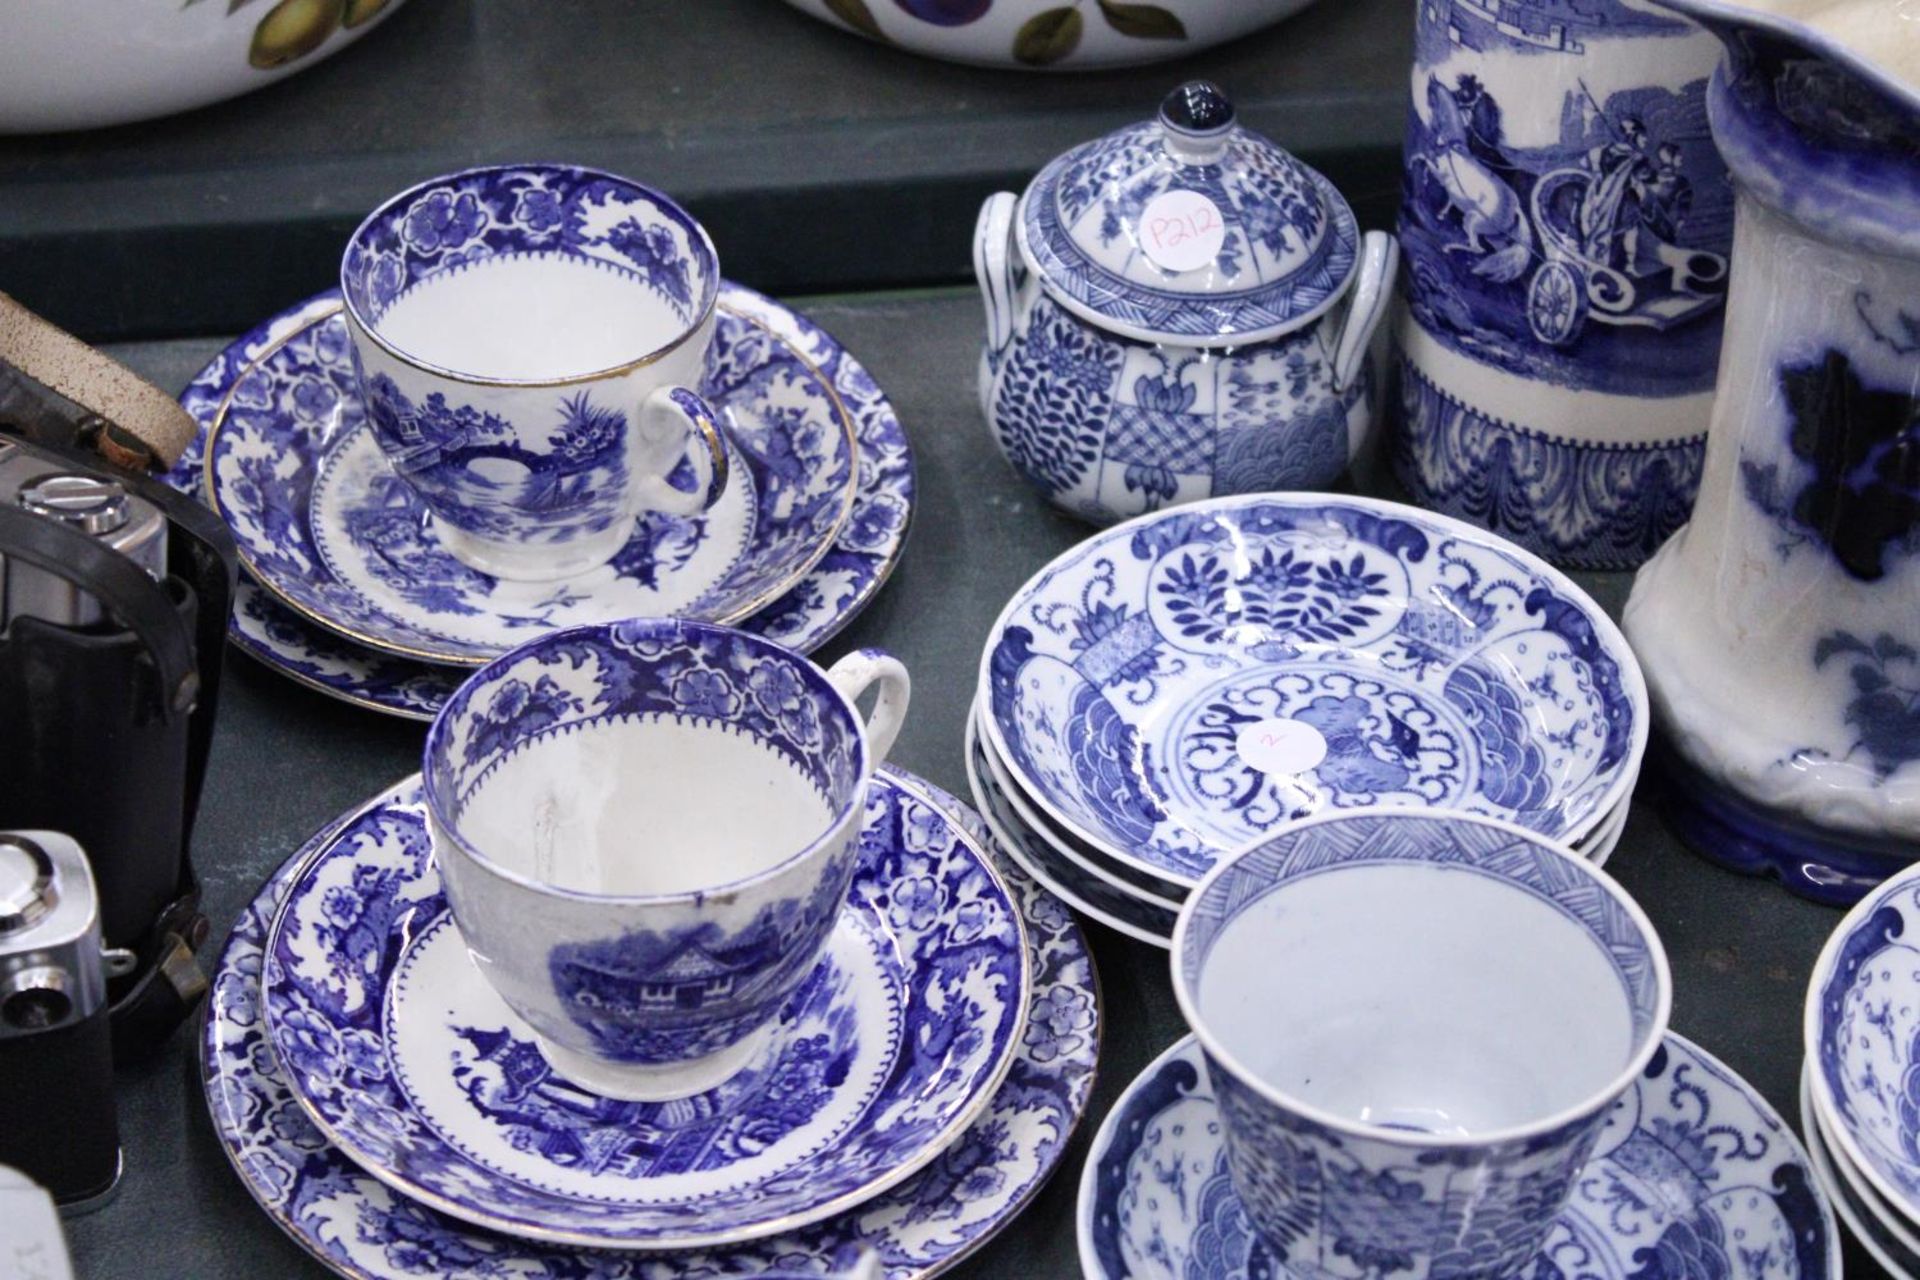 A LARGE QUANTITY OF ORIENTAL STYLE BLUE AND WHITE TO INCLUDE CUPS,SAUCERS,SIDE PLATES PLUS A JUG AND - Image 3 of 6